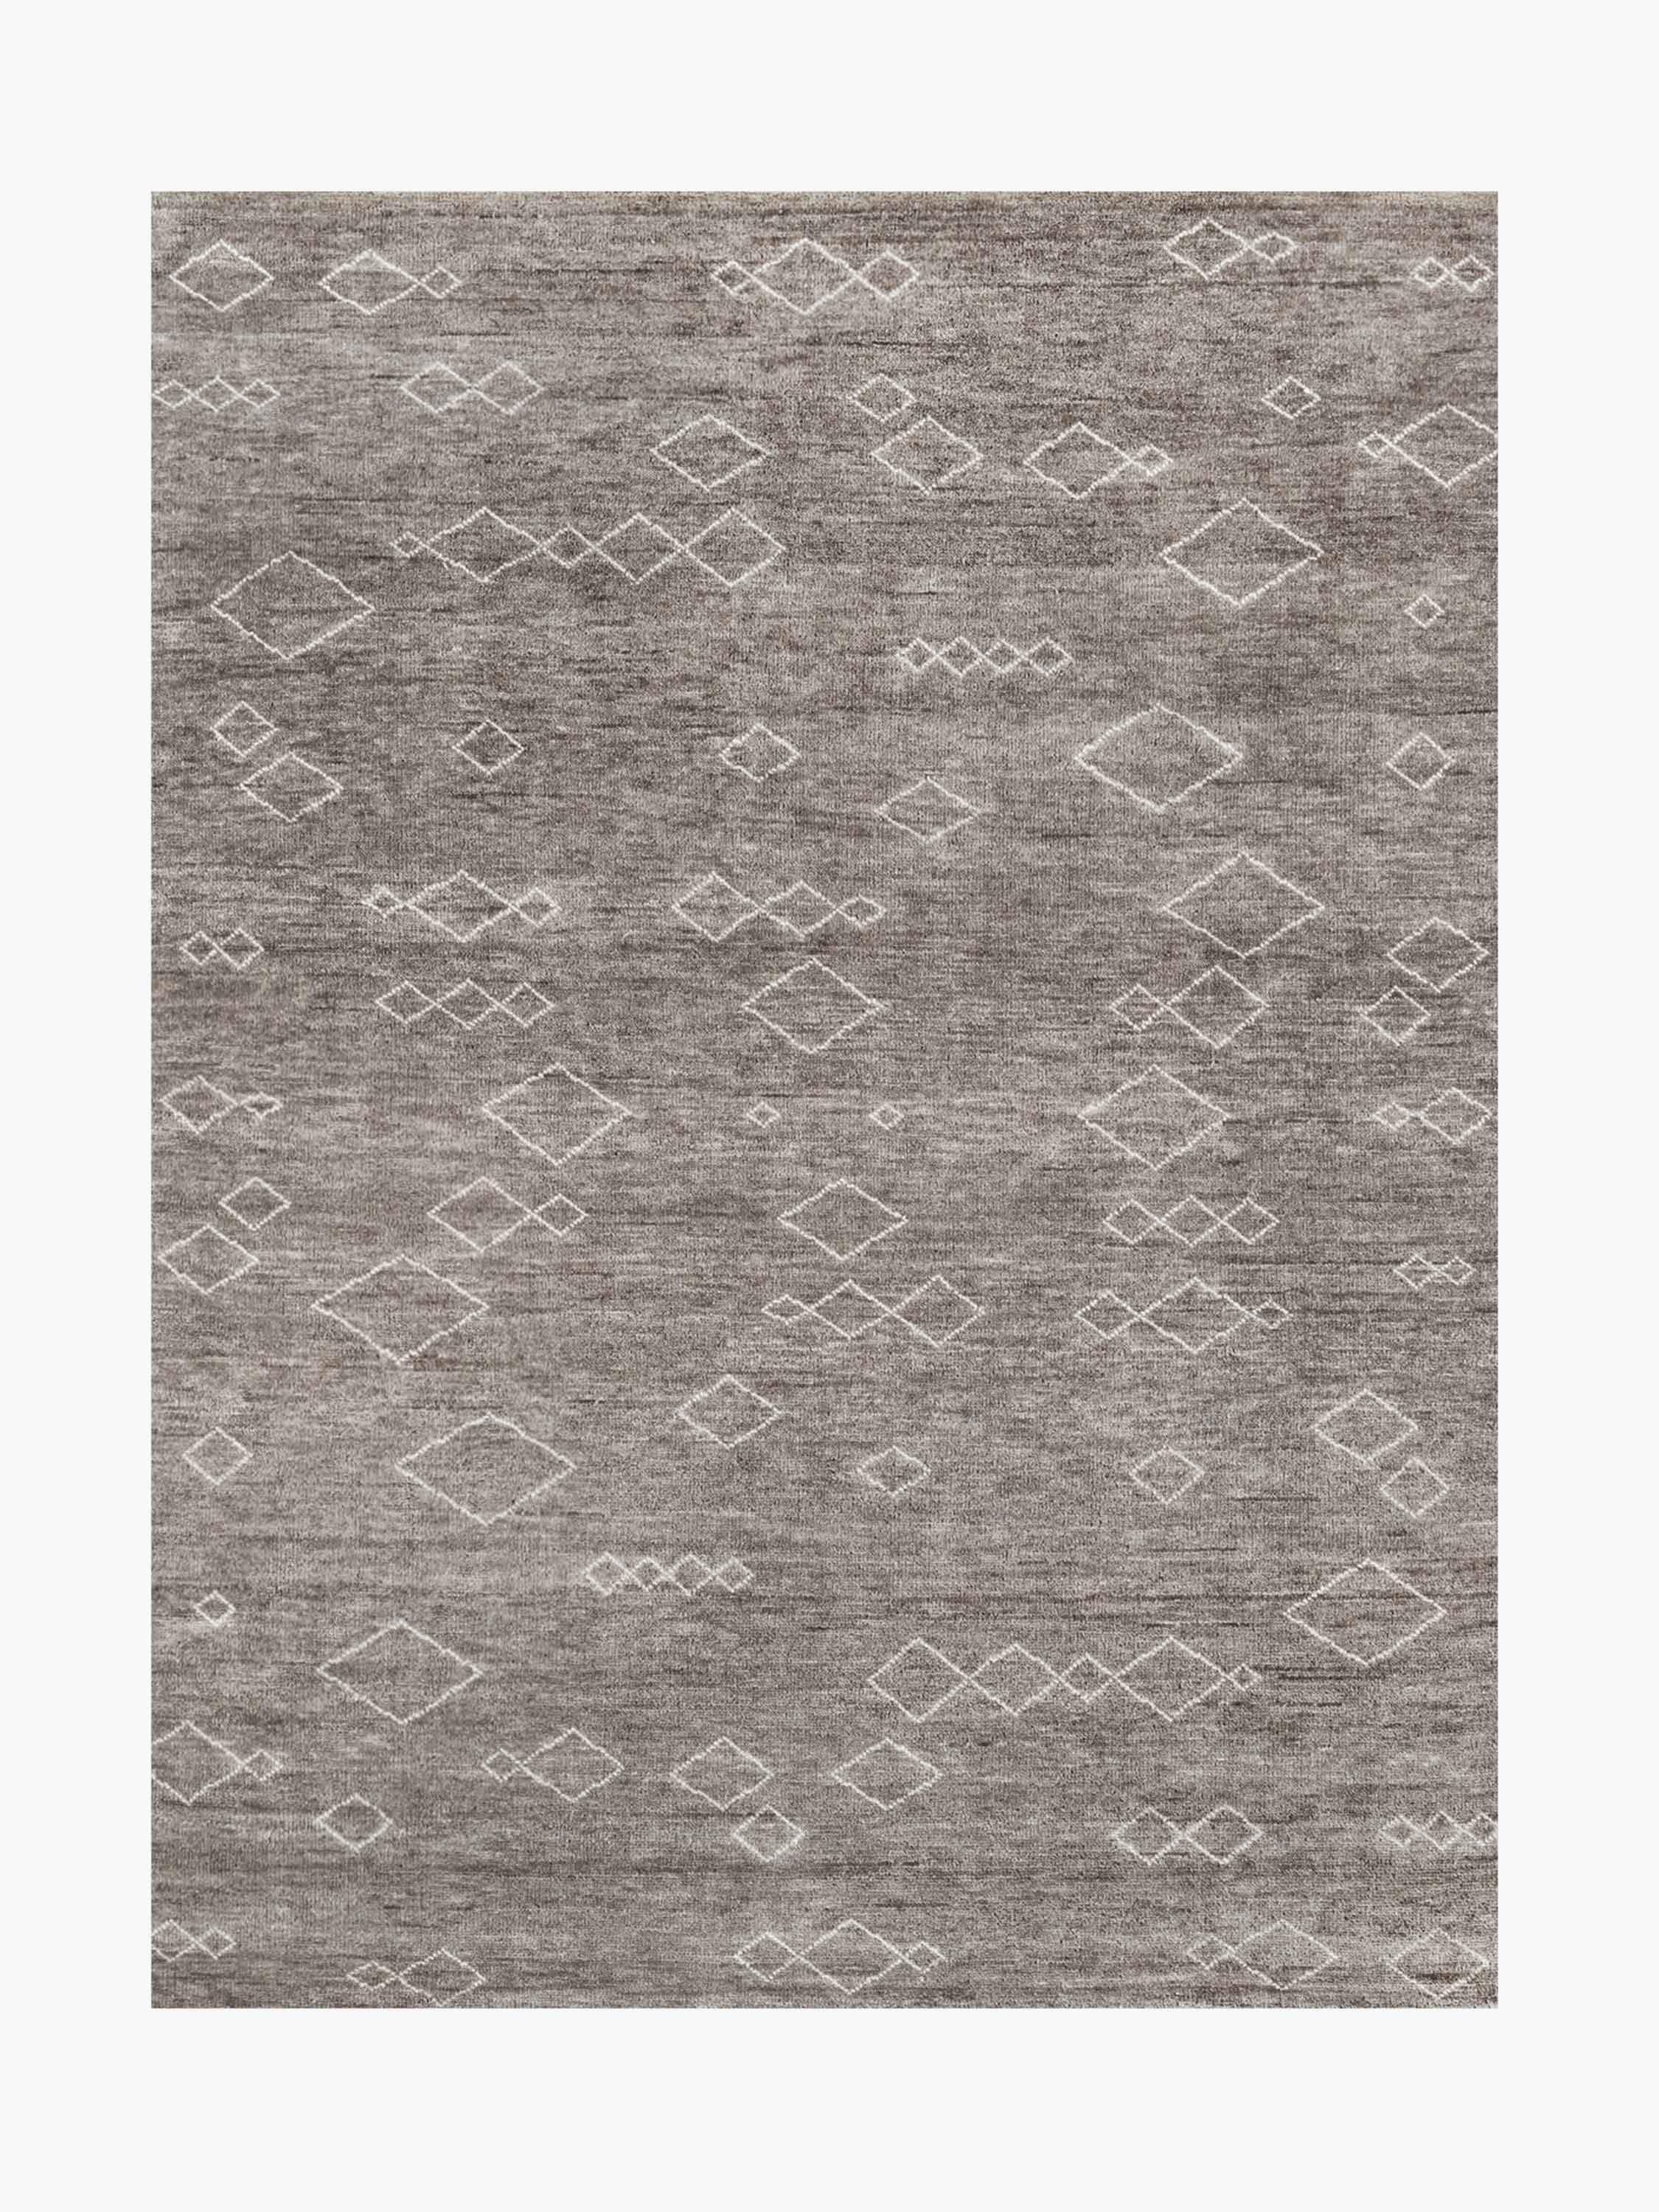 For Sale: Gray (Graphite/Sand) Ben Soleimani Arisa Rug– Moroccan Hand-knotted Plush Wool Carbon/Mist 6'x9'